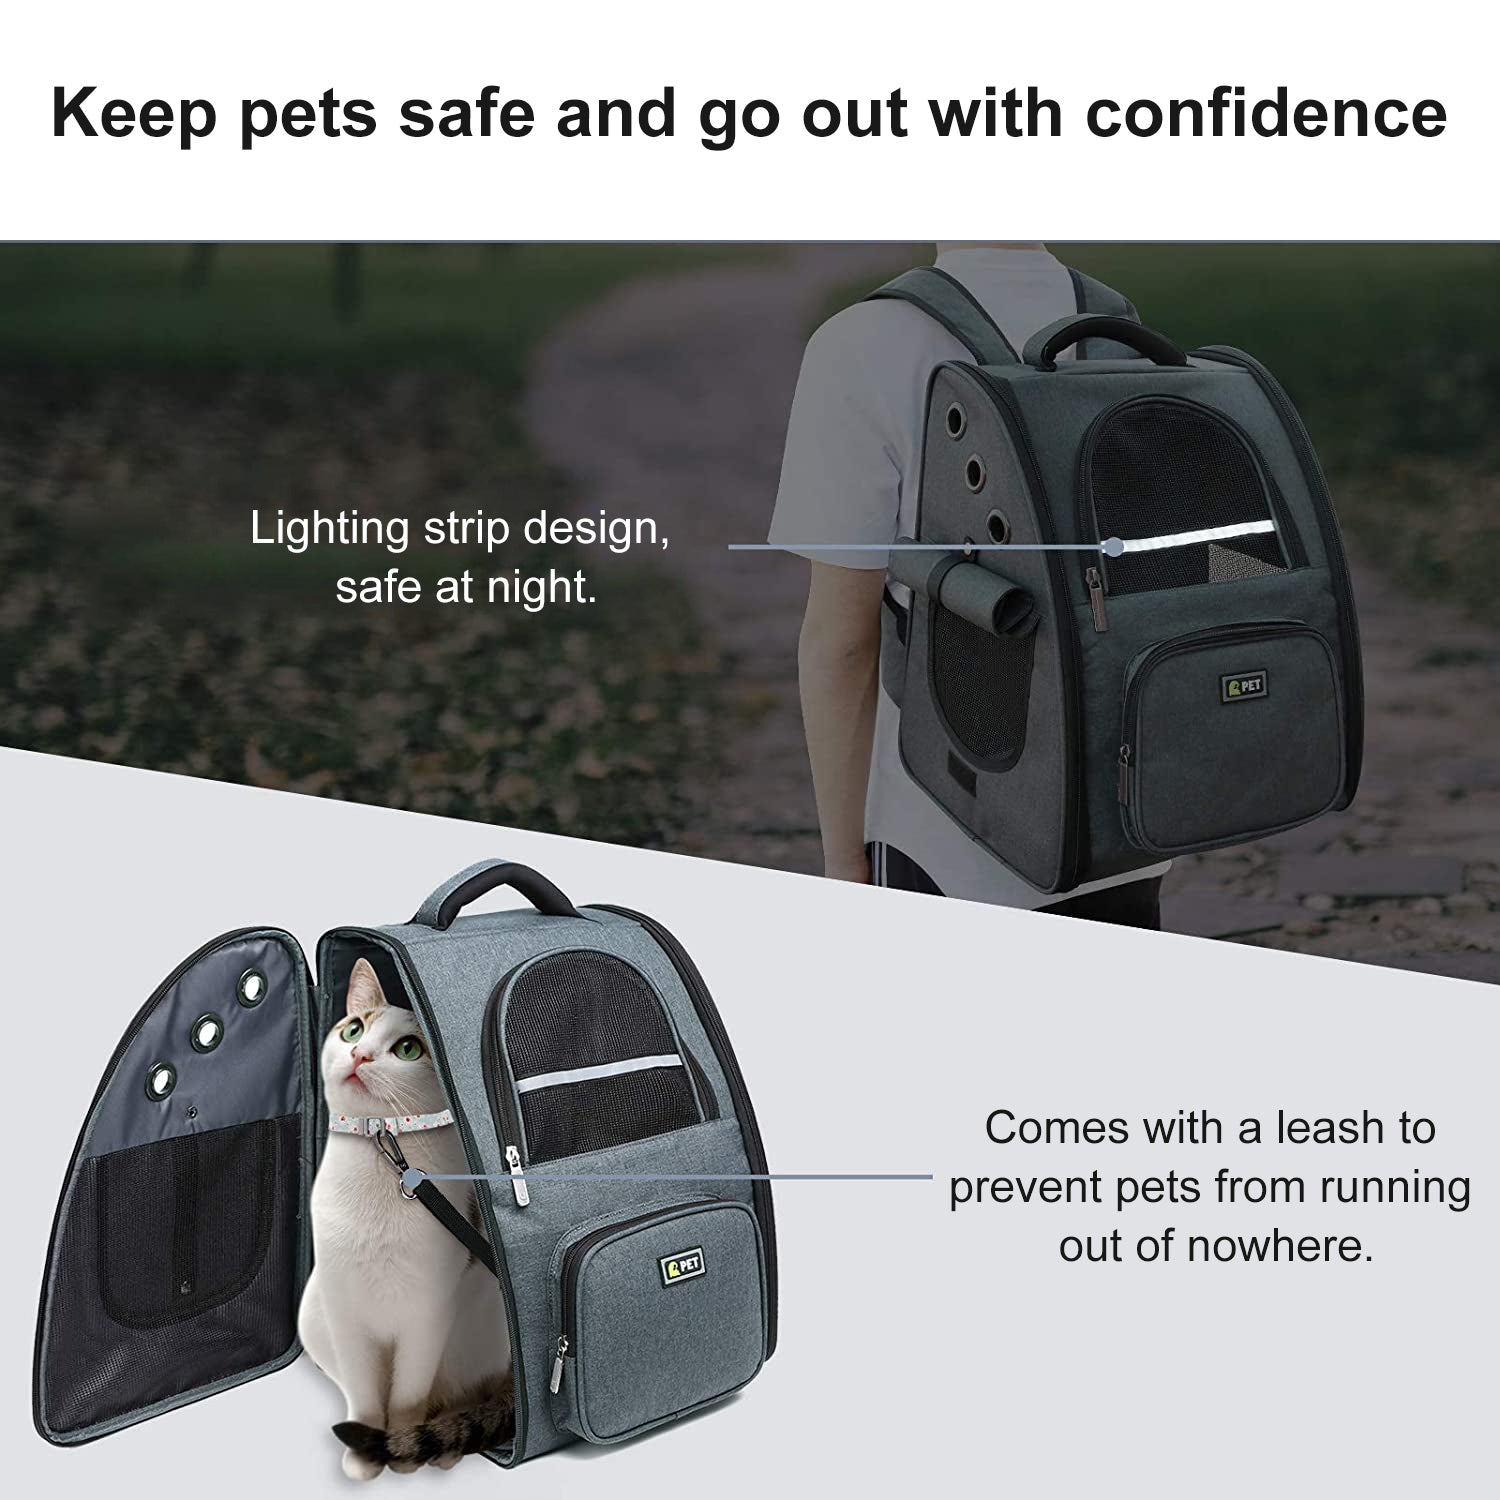 X XBEN Comfortable Dog Cat Backpack Carrier for Travel Hiking Walking Cycling Suitable for Pet up to 22 Pounds， Grey